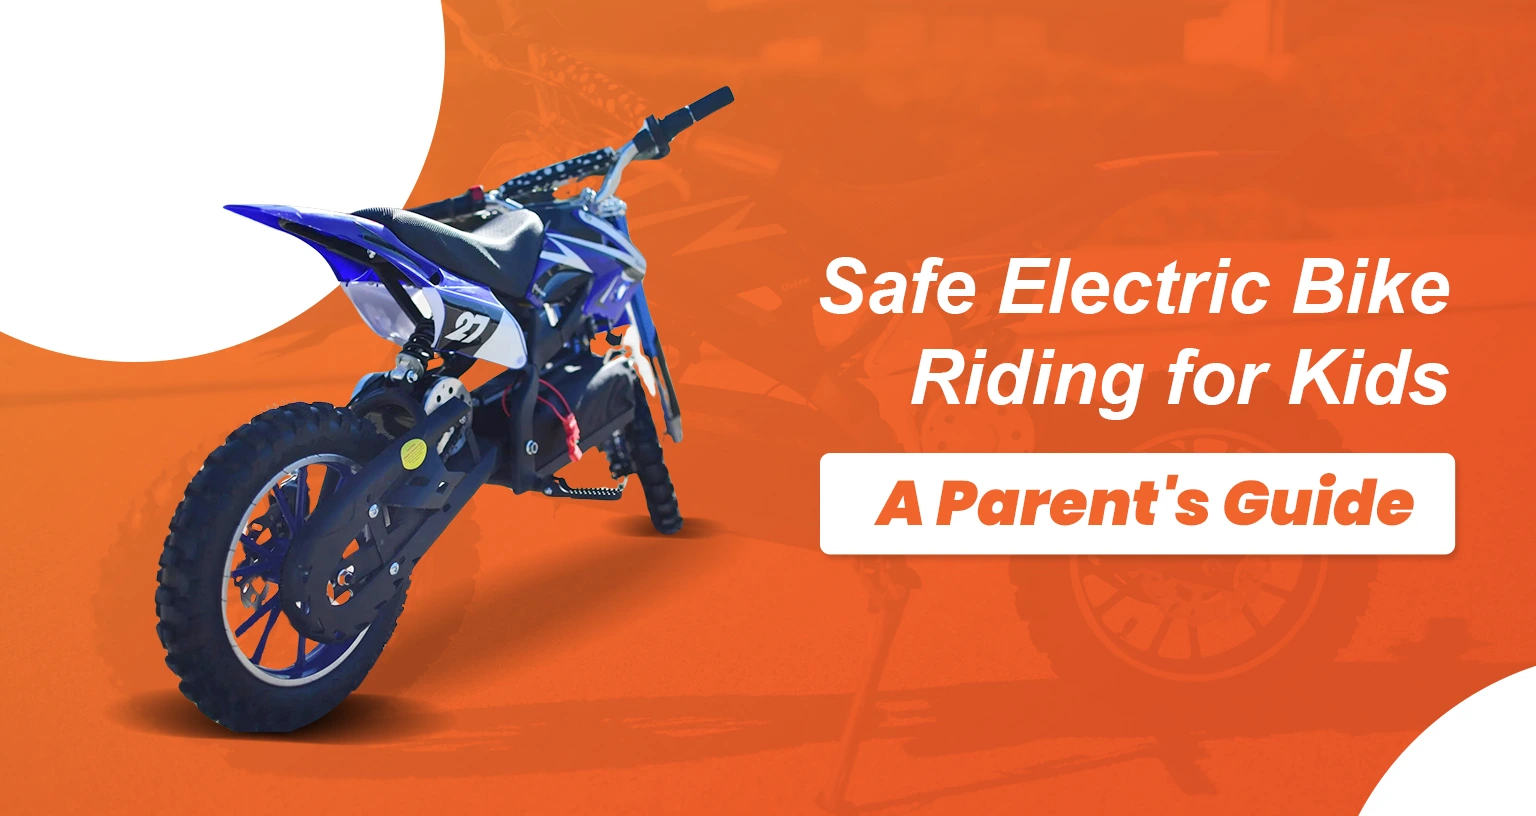 How to Help Your Kid Ride Safe with Electric Bikes